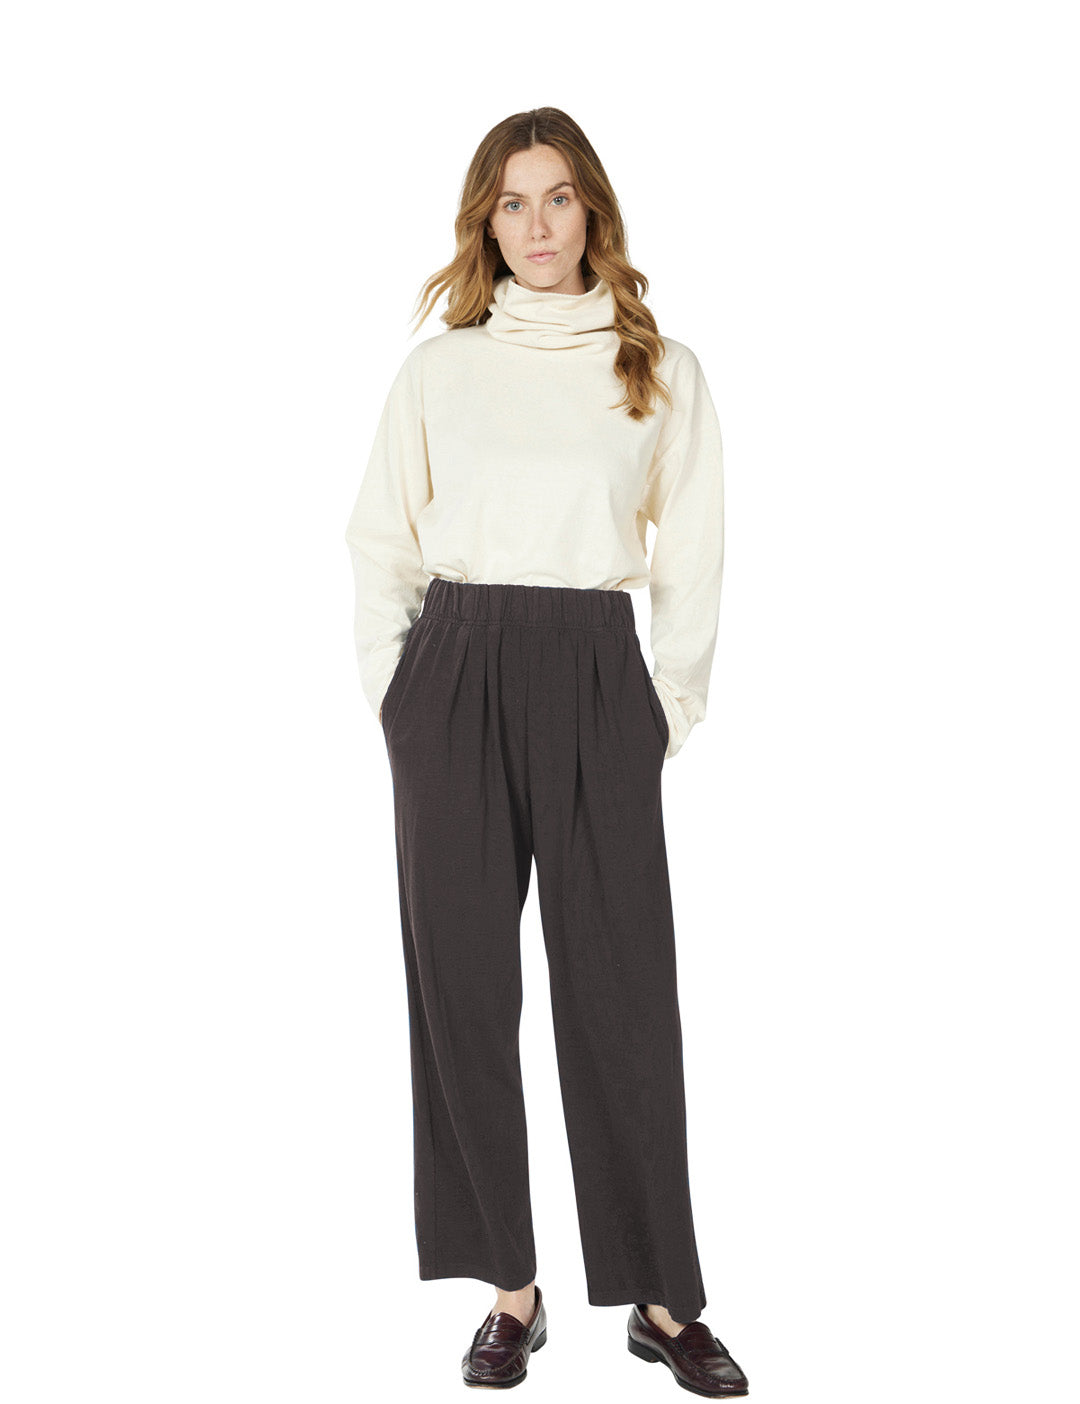 Black Cotton and Wool Double Pleat Pants FW23 25643684